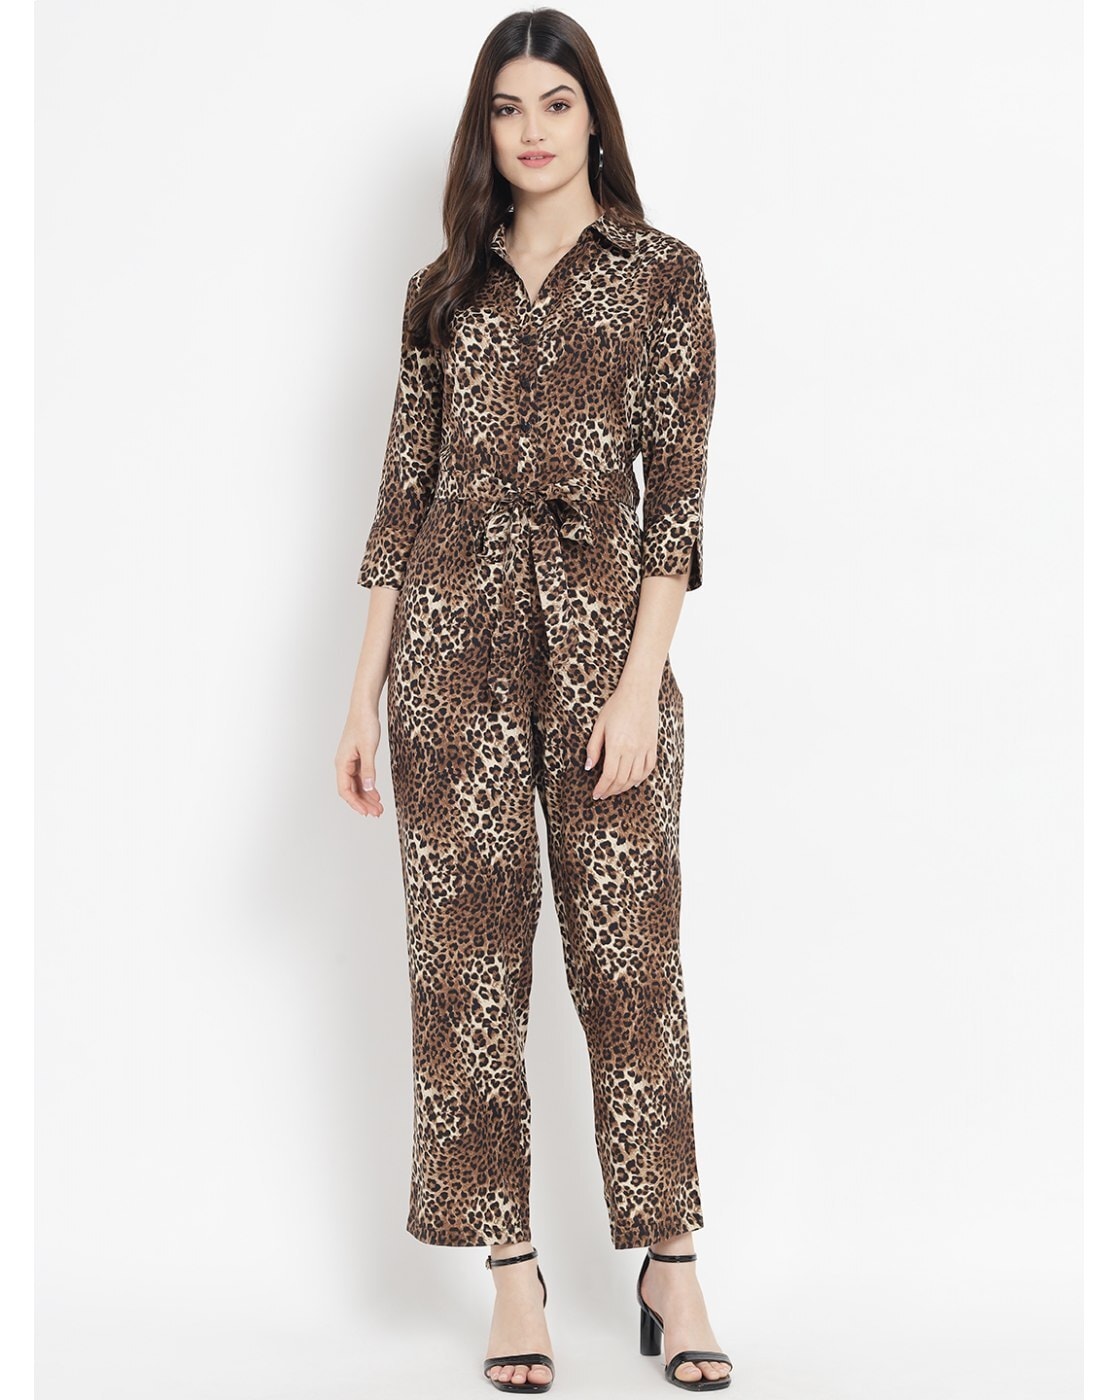 Leopard Jumpsuit Outfits (5 ideas & outfits) | Lookastic